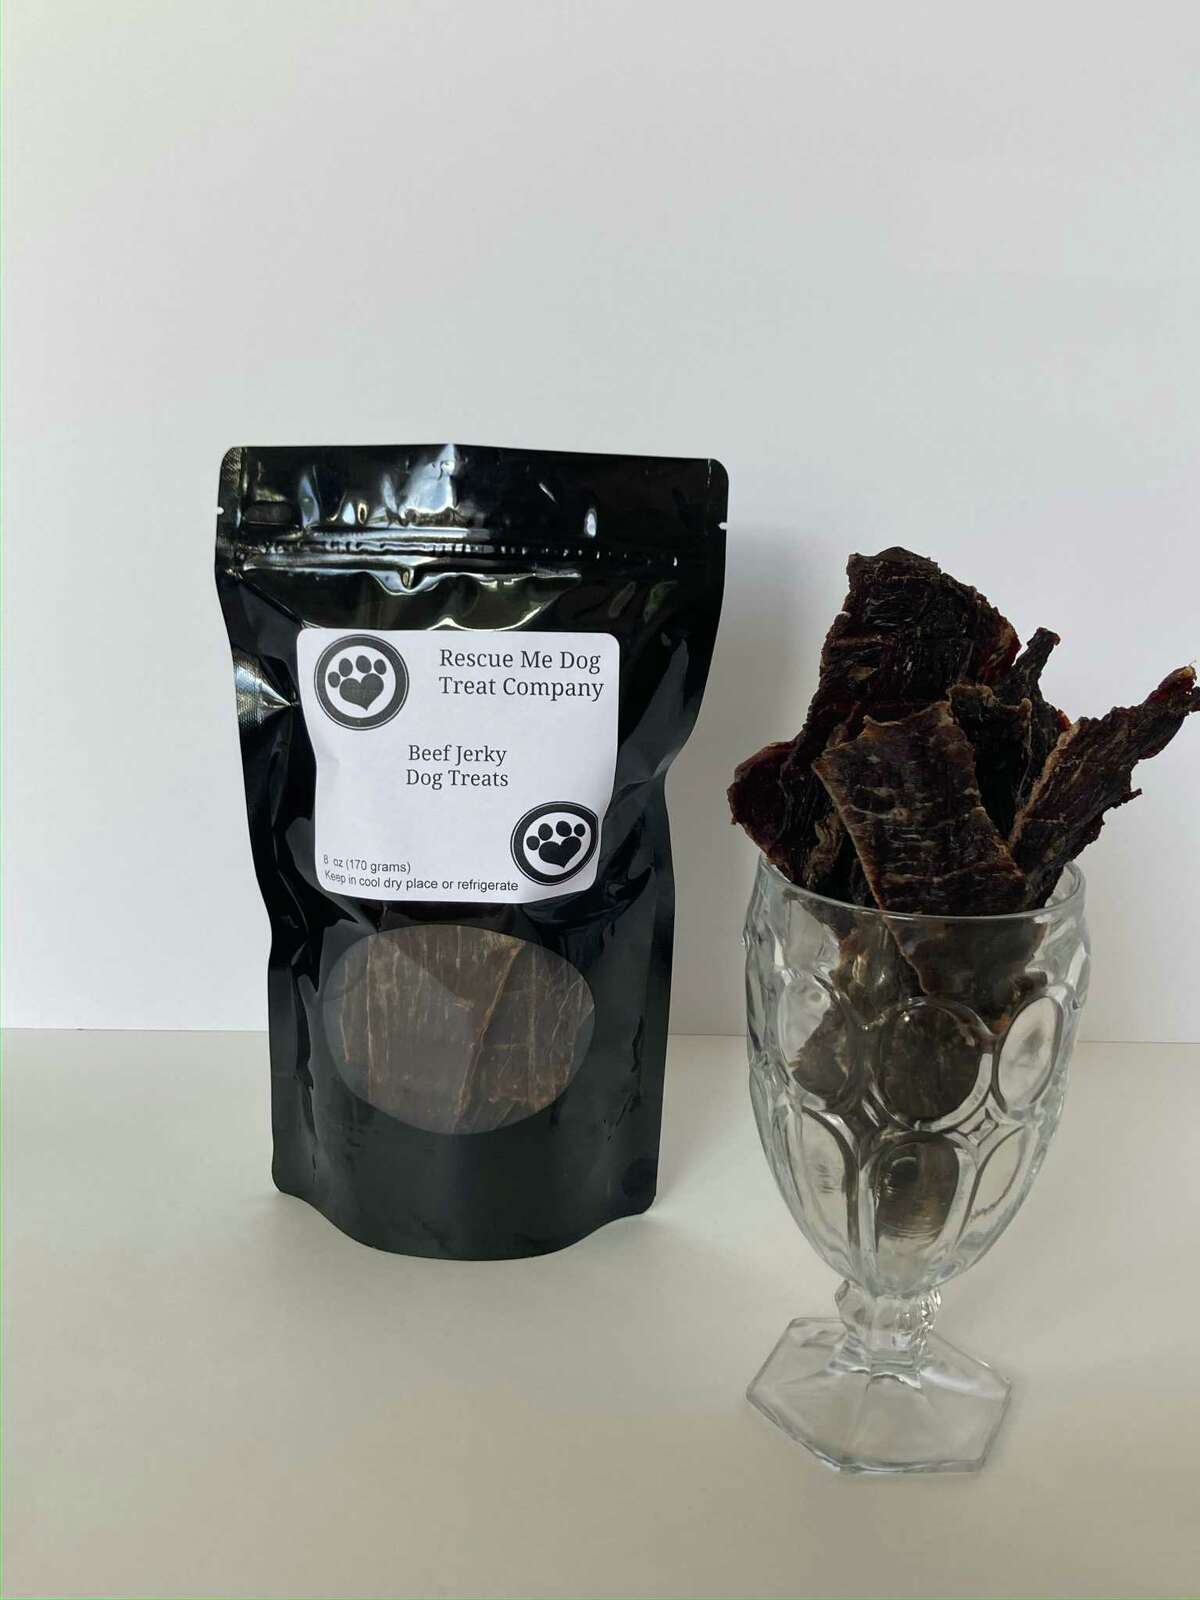 Rescue Me Dog Treat Company sells a variety of healthy pet treats including meat jerkies and cookies. The business donates half of its proceeds to pet rescues around the area.